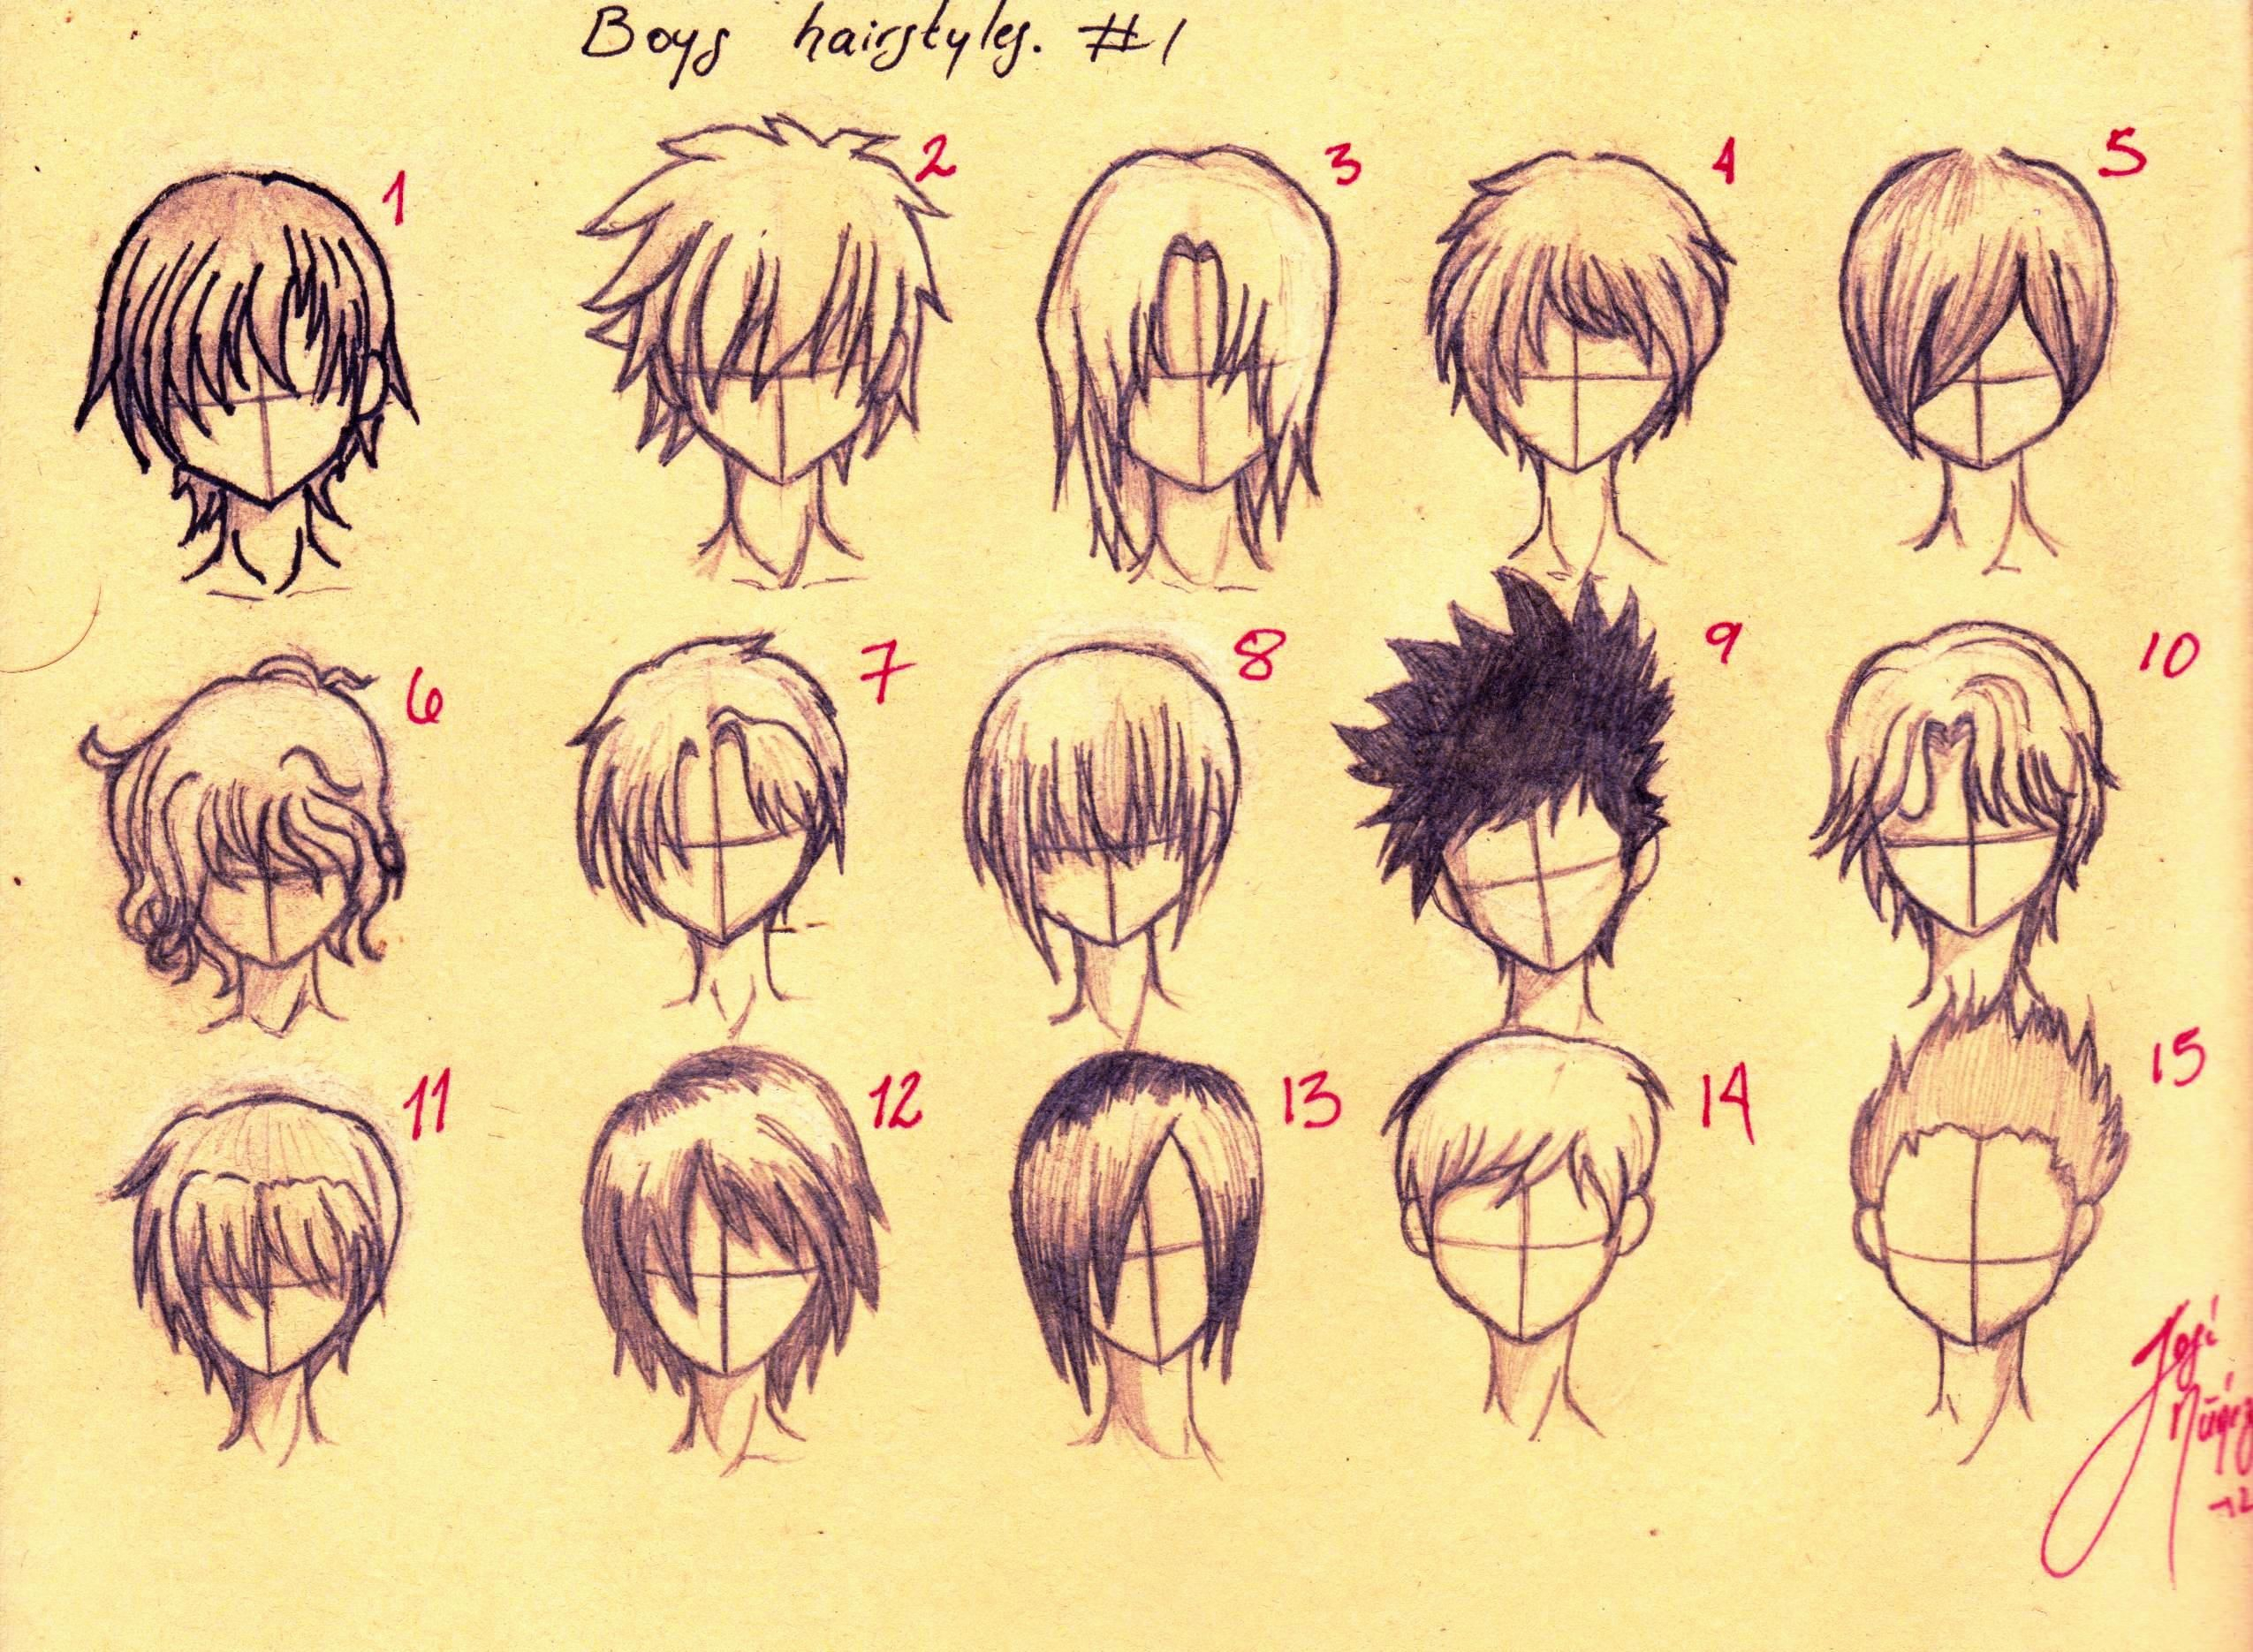 Anime Hairstyles Drawing at GetDrawings | Free download